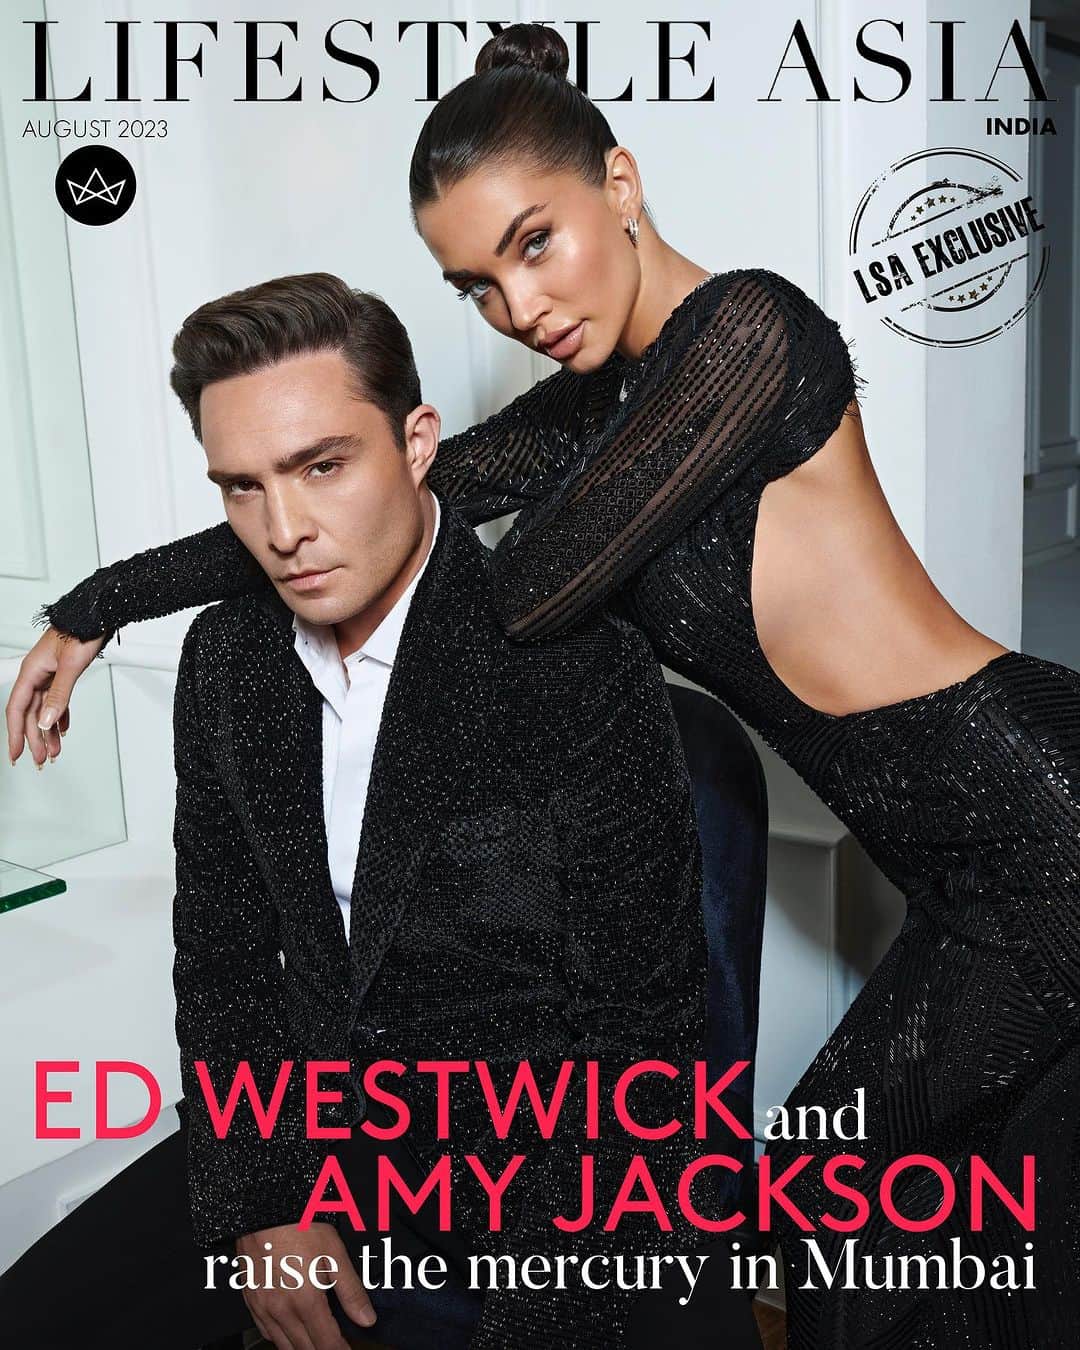 エド・ウェストウィックのインスタグラム：「Just a few days ago, the charismatic duo of Amy Jackson (@iamamyjackson) and Ed Westwick (@edwestwick) lit up Mumbai with their unexpected appearance. From capturing adorable selfies at the iconic Gateway of India to mingling with the vibrant GenZ crowd, they truly became the talk of town. Everywhere you turned, you'd hear people excitedly discussing "Chuck Bass being in the city". Amy's return to the country to film her next project was a treat for her fans, providing them with countless Pinterest-worthy moments. Amidst all the excitement, we spent a day with these two stars, resulting in our August 2023 cover.  Amy is wearing a black evening gown crafted with hand-embroidered black crystals, swarovskis and bugle beads from Manish Malhotra's (@manishmalhotraworld) 2023 couture collection while Ed sports a classic Manish Malhotra black bugle and Swarovski embellished blazer paired with a winged tip collar pleated shirt and slim black pants.  Editor-in-Chief: Rahul Gangwani (@rahulgangs_) Photographer: The House of Pixels (@thehouseofpixels) Stylist and creative director: Mohit Rai (@mohitrai)  Assisted by: Shubhi Kumar (@shubhi.kumar) Amy’s HMU: Mehak Oberoi (@mehakoberoi) Ed’s Makeup: Vishakha Jain (@makeupbyvishakha) Ed’s Hairstyling: Leo from Team Aalim Hakim (@aalimhakim) Interview by Mayukh Majumdar (@mayuxkh) Location: Sofitel BKC (@sofitelmumbaibkc) Artiste Management: Viniyard Films (@viniyardfilms) - Jubin Rajesh Desai (@jubinrajeshdesai), Deepa Doshi (@doshideepa) Shoot produced by: Analita Seth (@analitaseth) Jewellery on Amy: Bulgari (@bulgari)   #EdWestwick #AmyJackson #LSAIndiaCover #LifestyleAsiaIndiaCover」